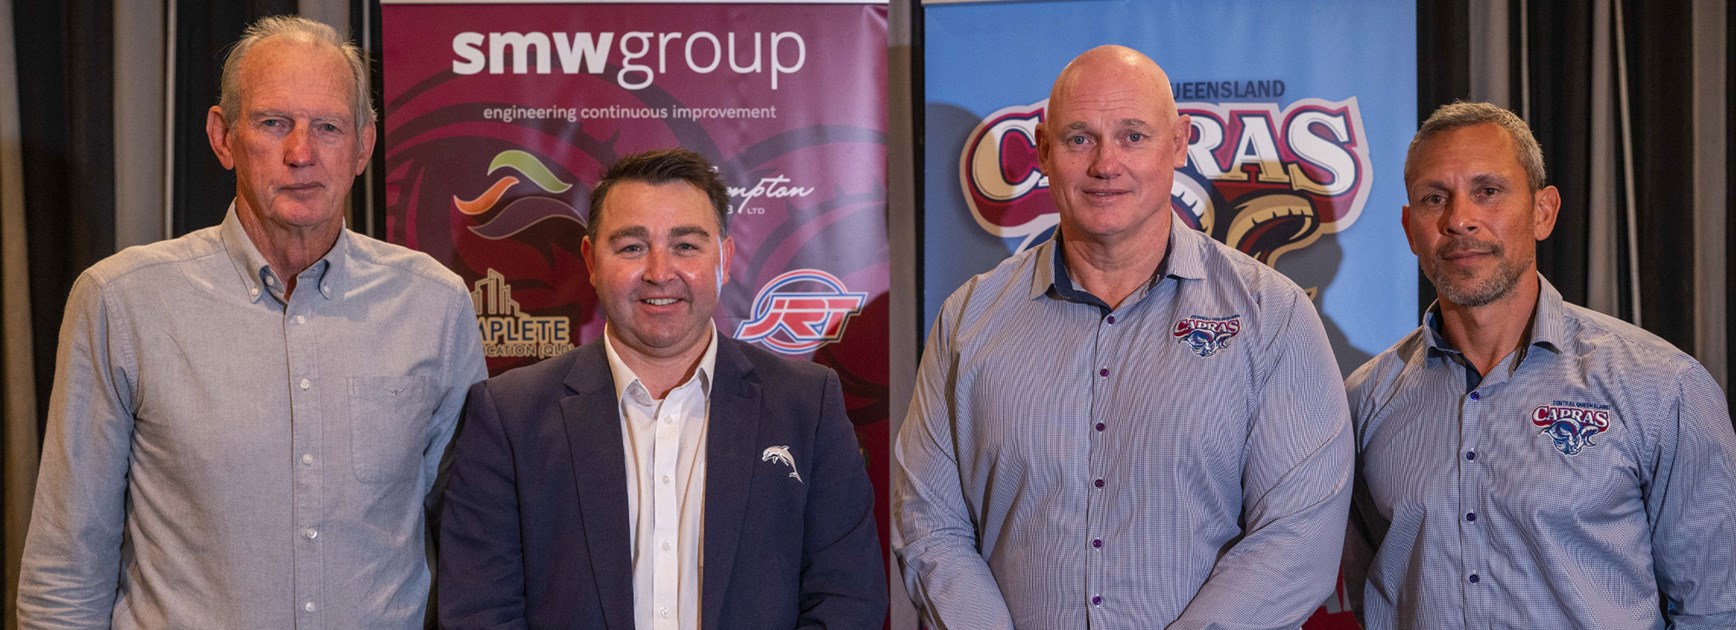 Dolphins partner with Capras to support CQ Rugby League